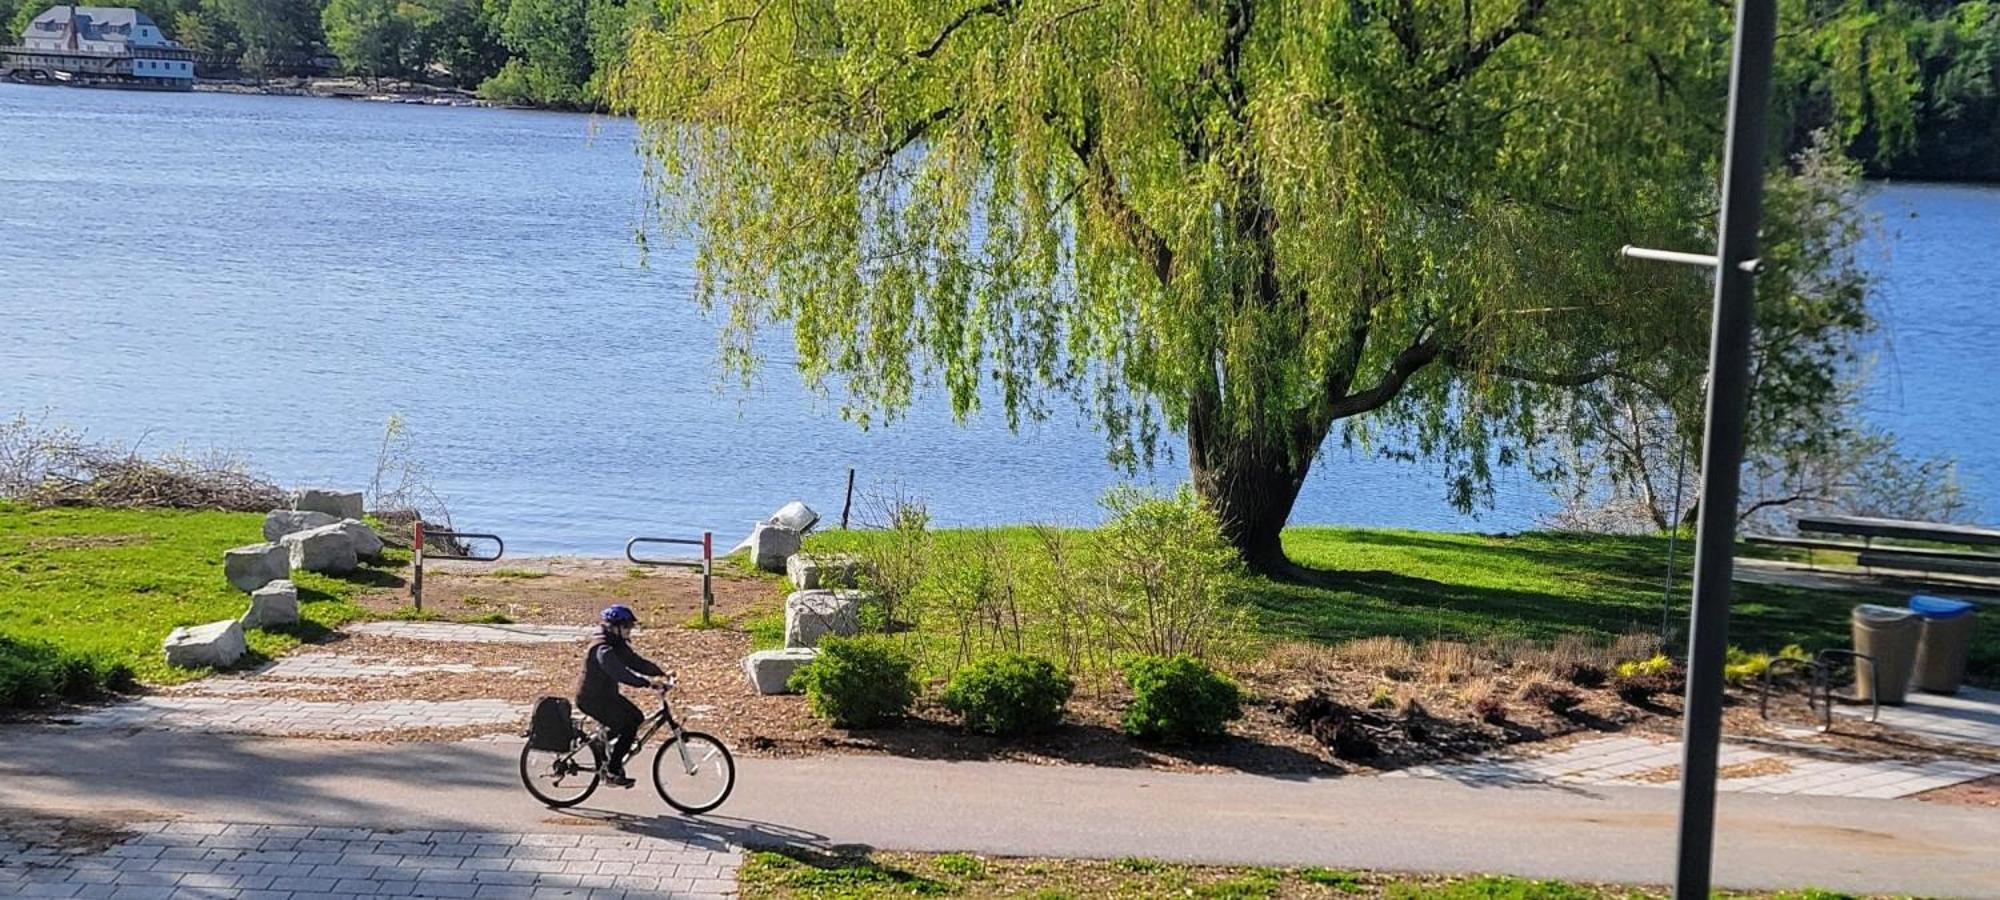 Kokomo Inn Bed And Breakfast Ottawa-Gatineau'S Only Tropical Riverfront B&B On The National Capital Cycling Pathway Route Verte #1 - For Adults Only - Chambre D'Hotes Tropical Aux Berges Des Outaouais Bnb #17542O المظهر الخارجي الصورة